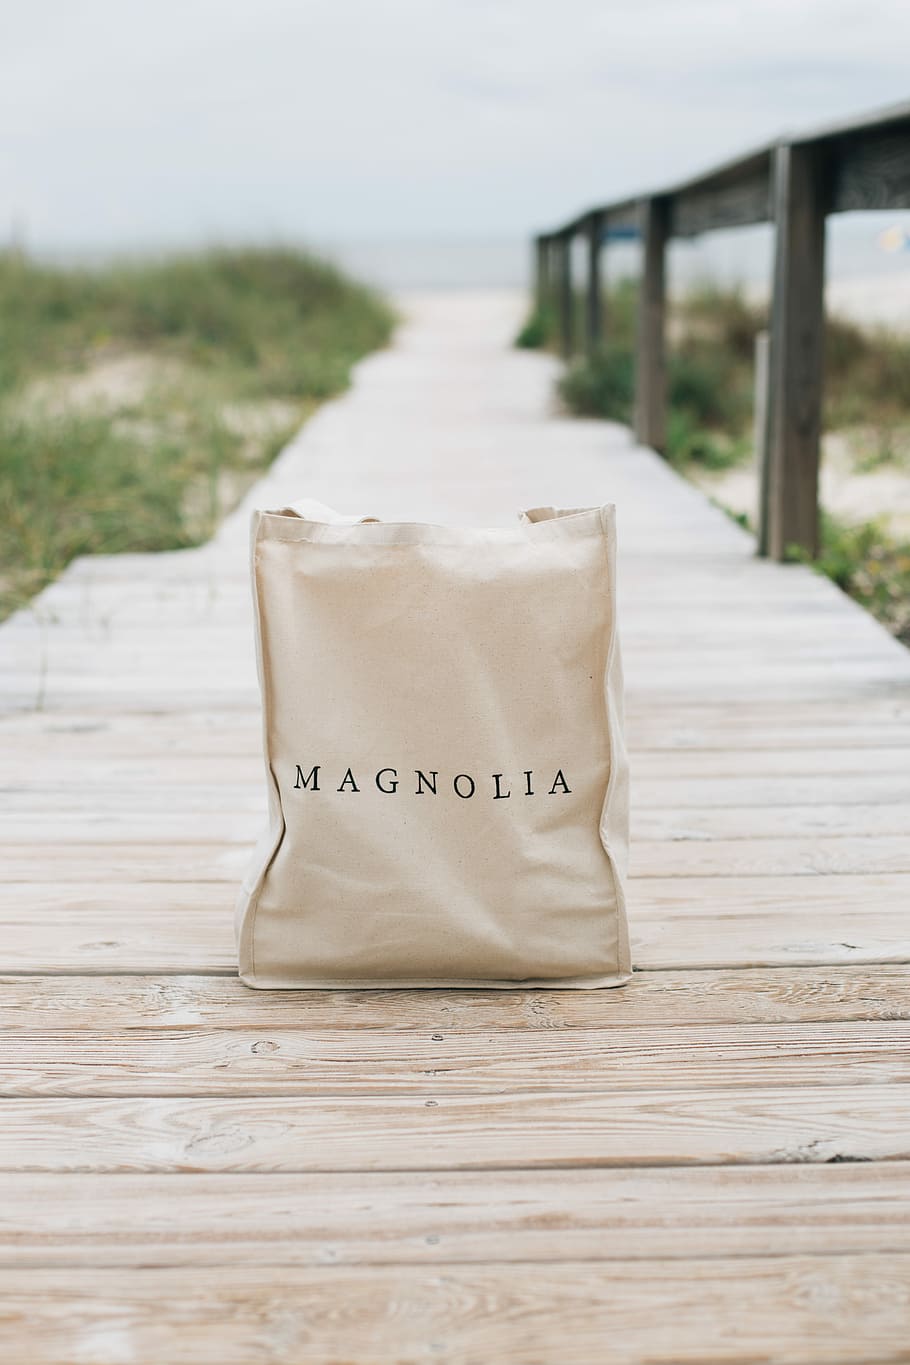 bag sitting on a dock, shallow focus photography of Magnolia bag on wooden dock